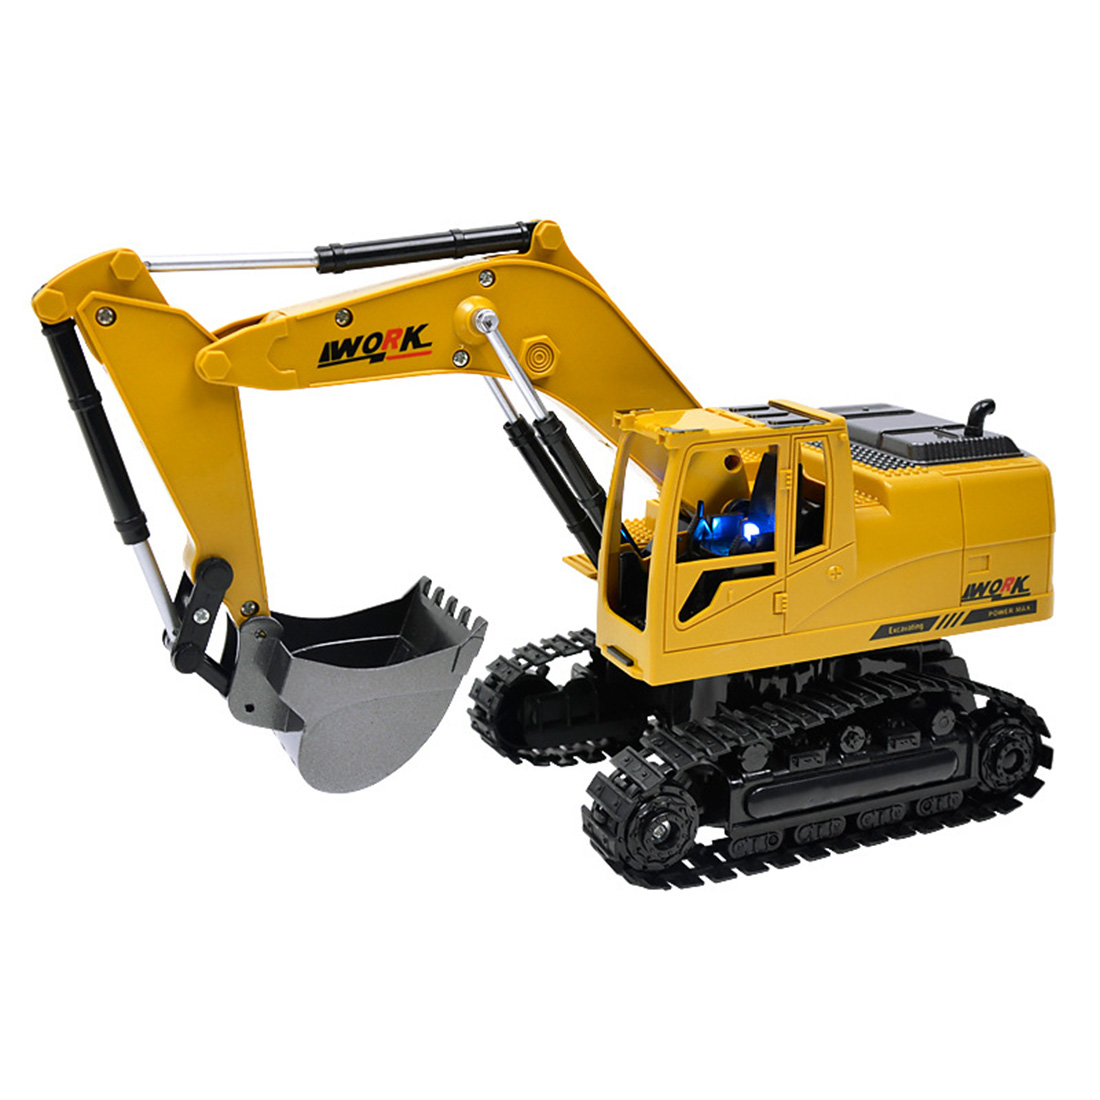 1:24 2.4G RC 8 Channel Crawler Excavator Shovel Crawler Navvy Model Construction Vehicle Remote Control Toys